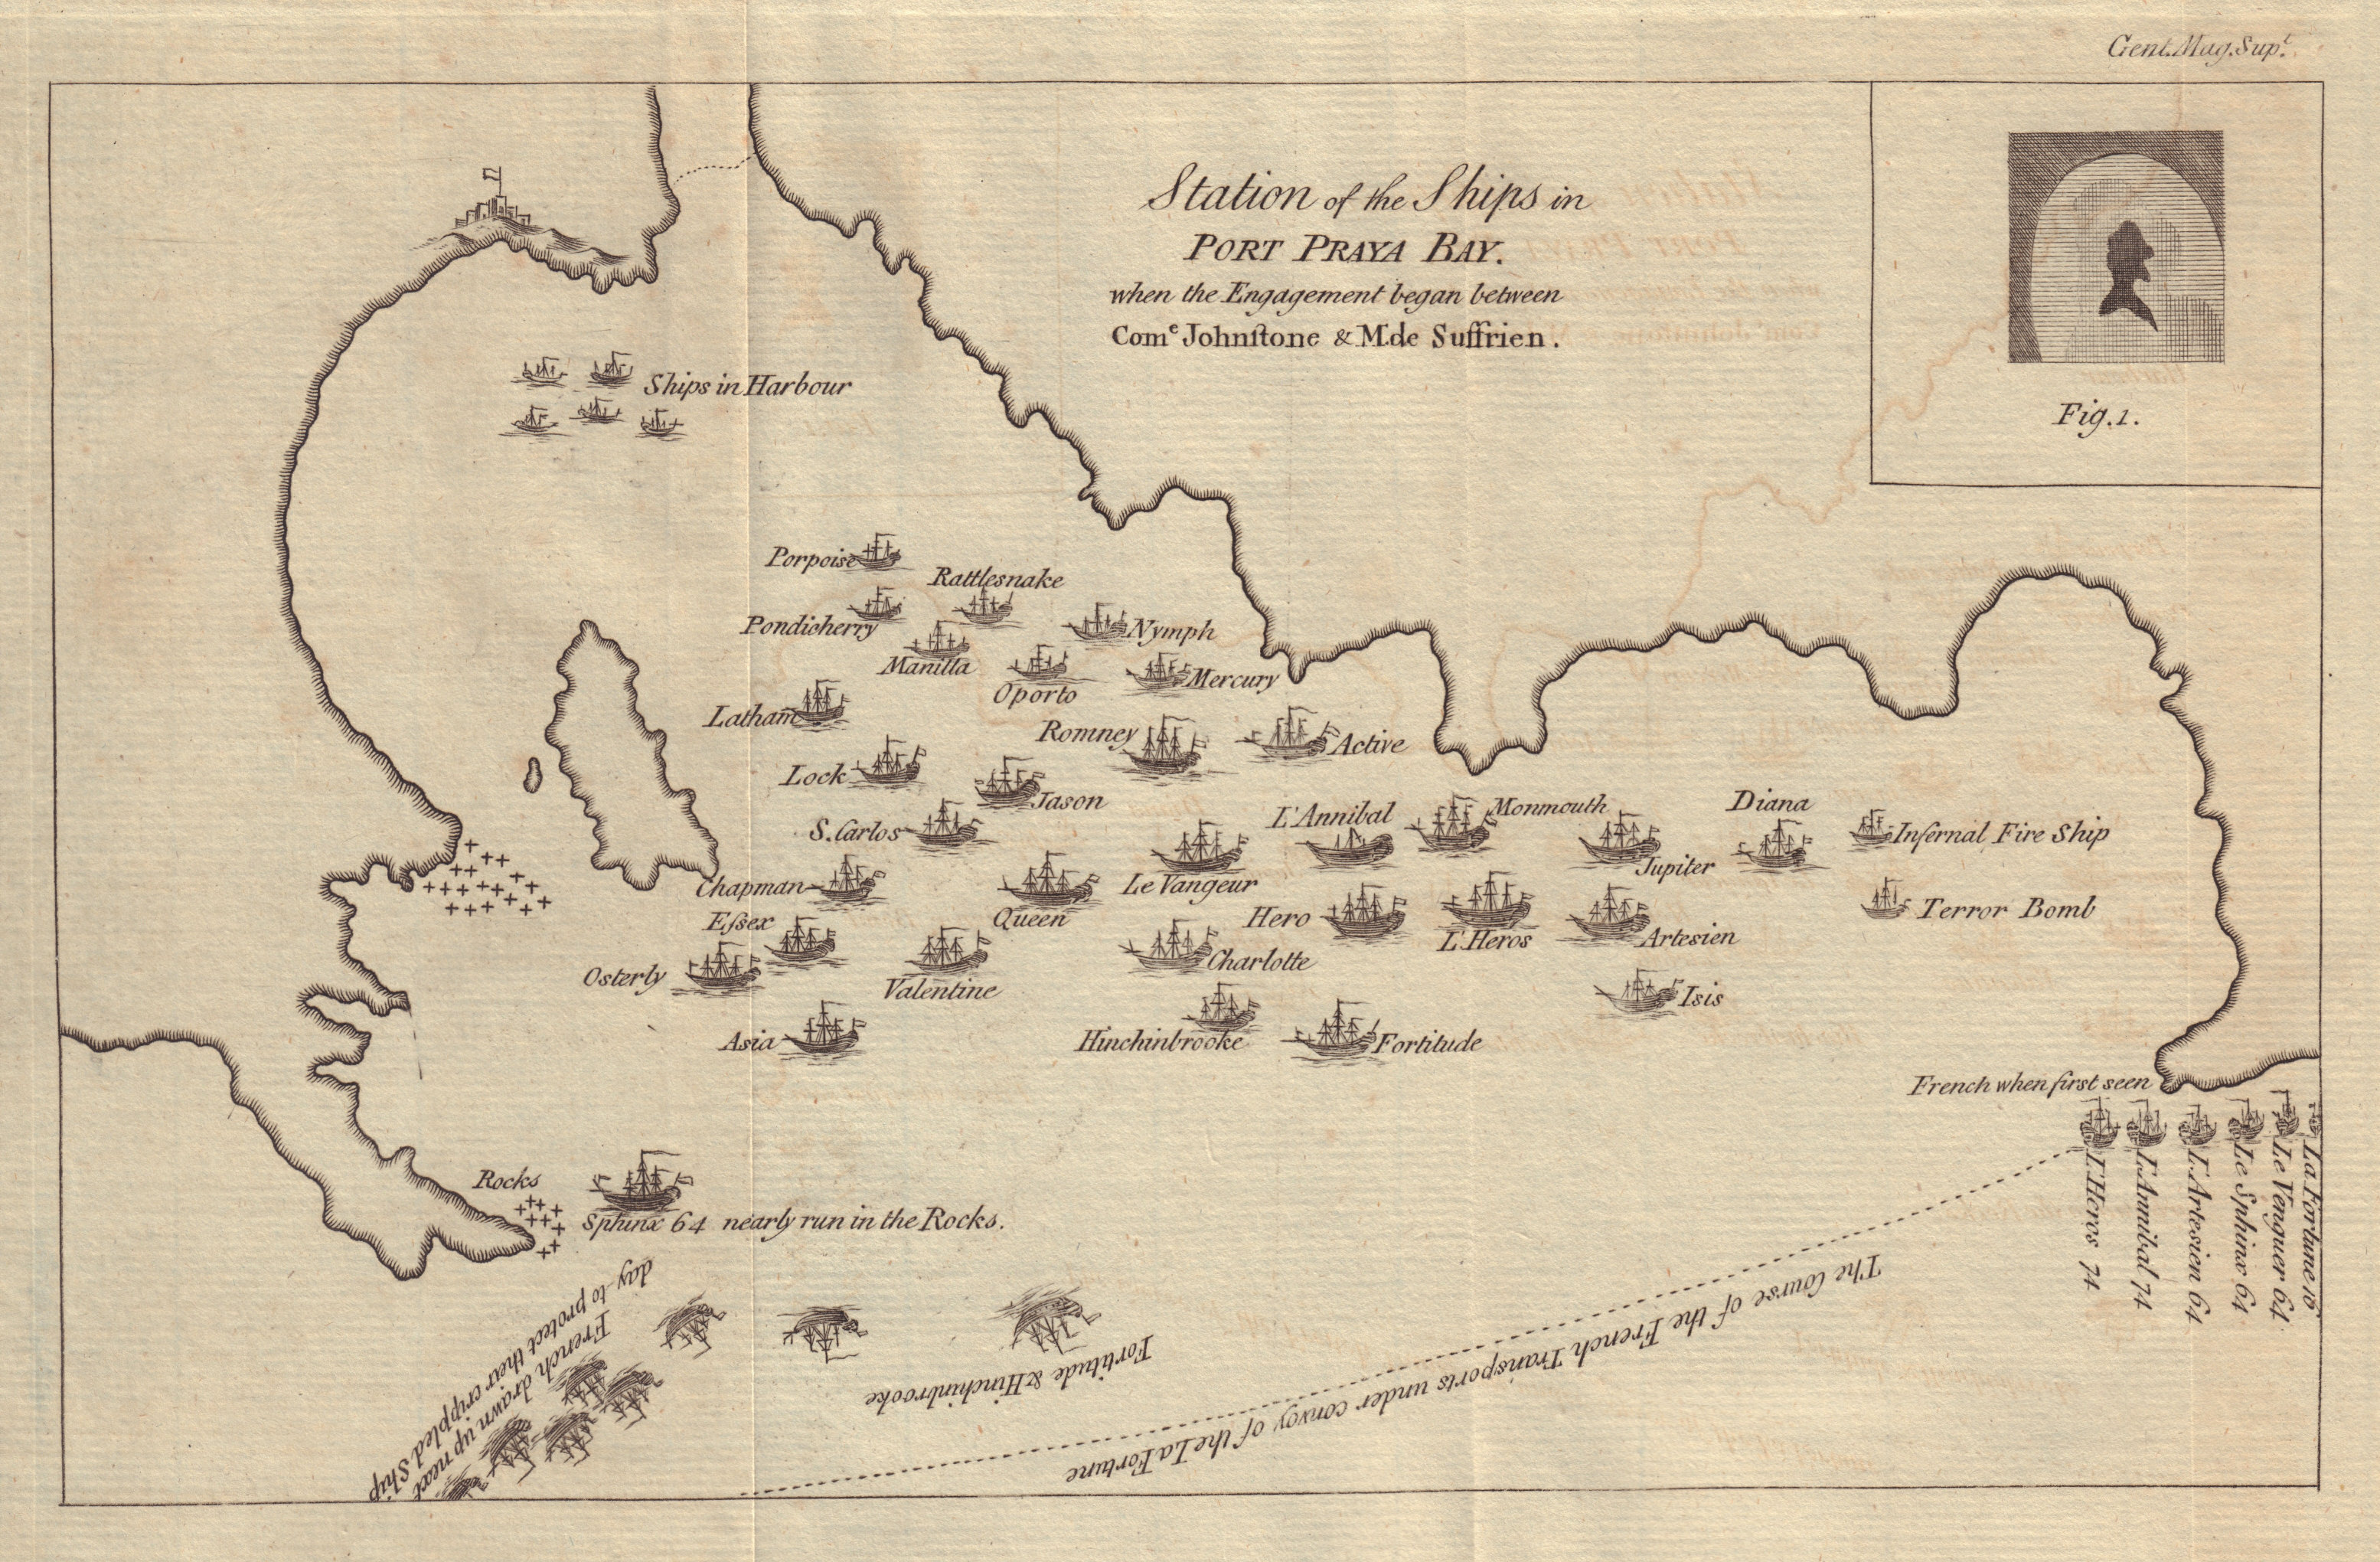 Station of the Ships in Port Praya Bay… Praia, Cape Verde. GENTS MAG 1781 map